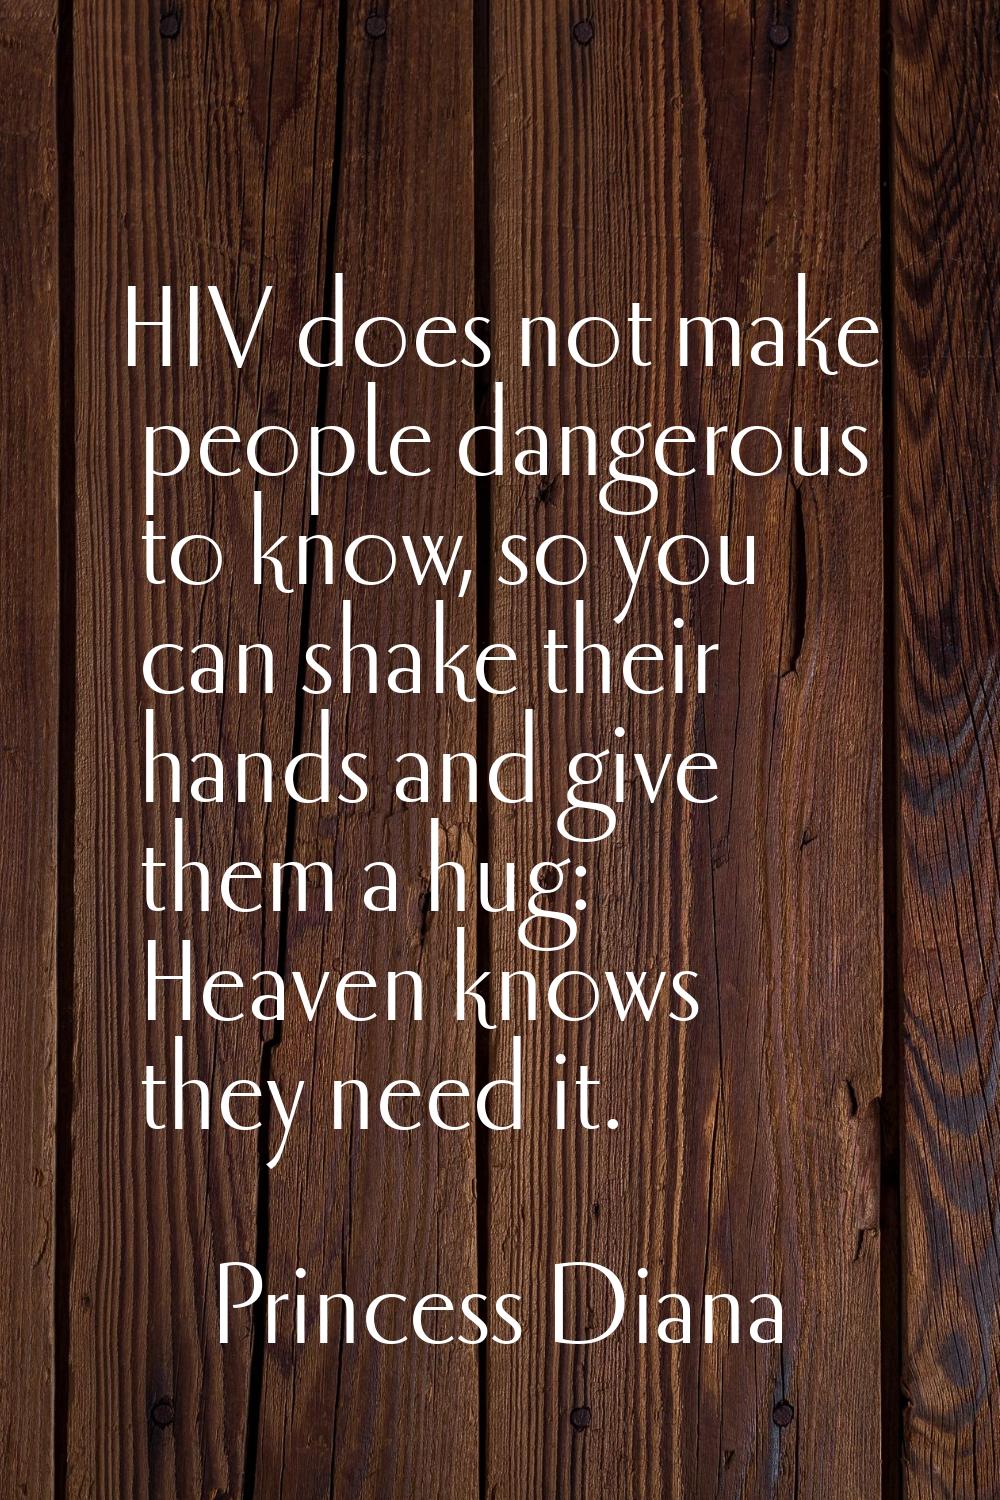 HIV does not make people dangerous to know, so you can shake their hands and give them a hug: Heave